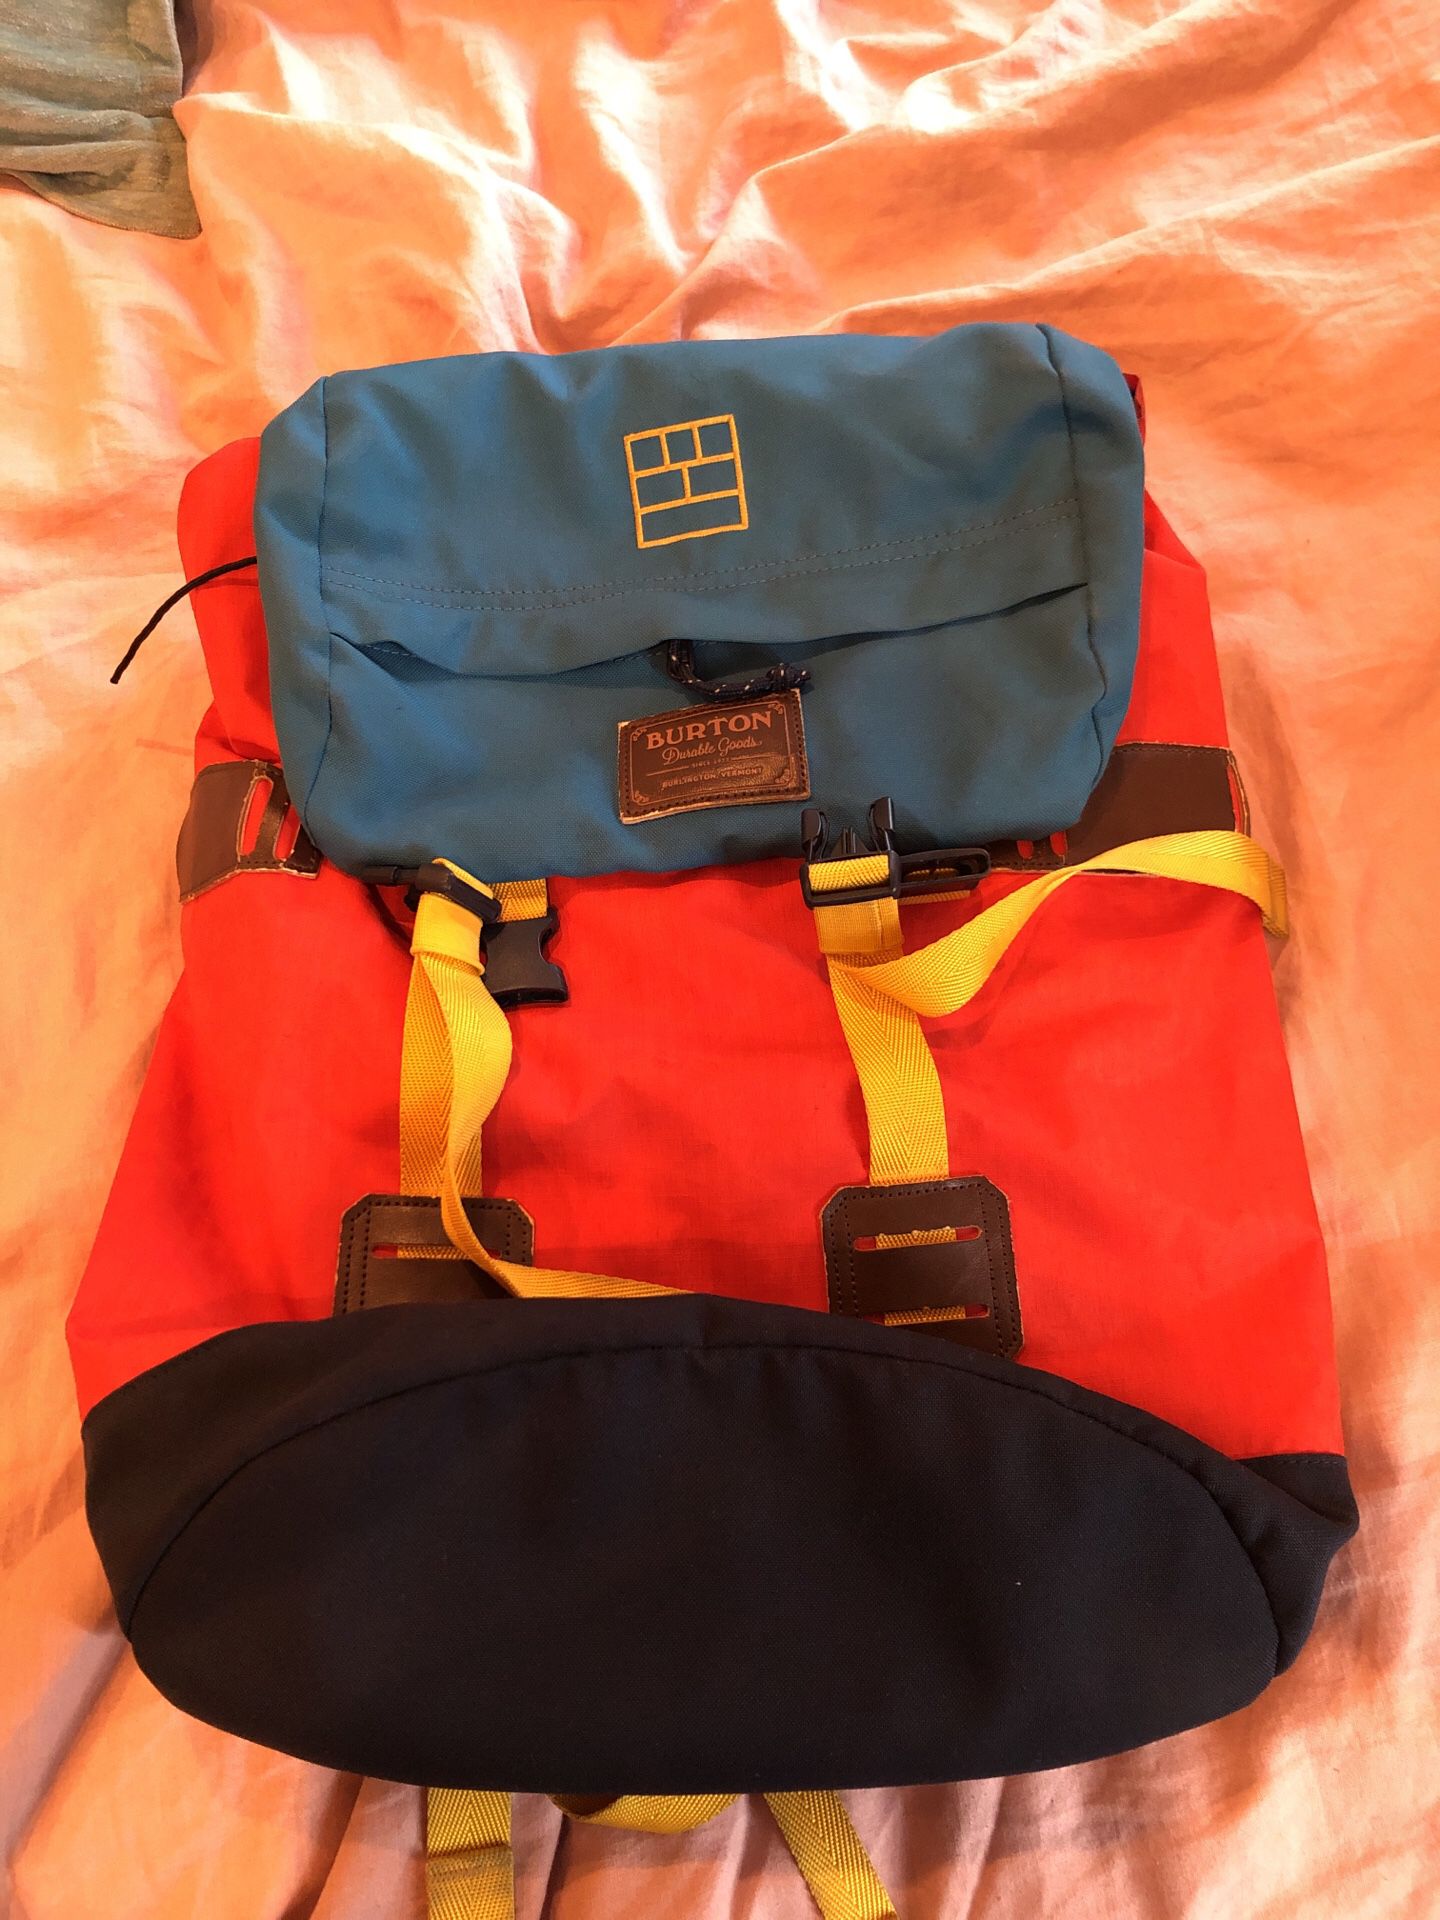 Bright Burton Backpack! Fun colors, perfect for summer!